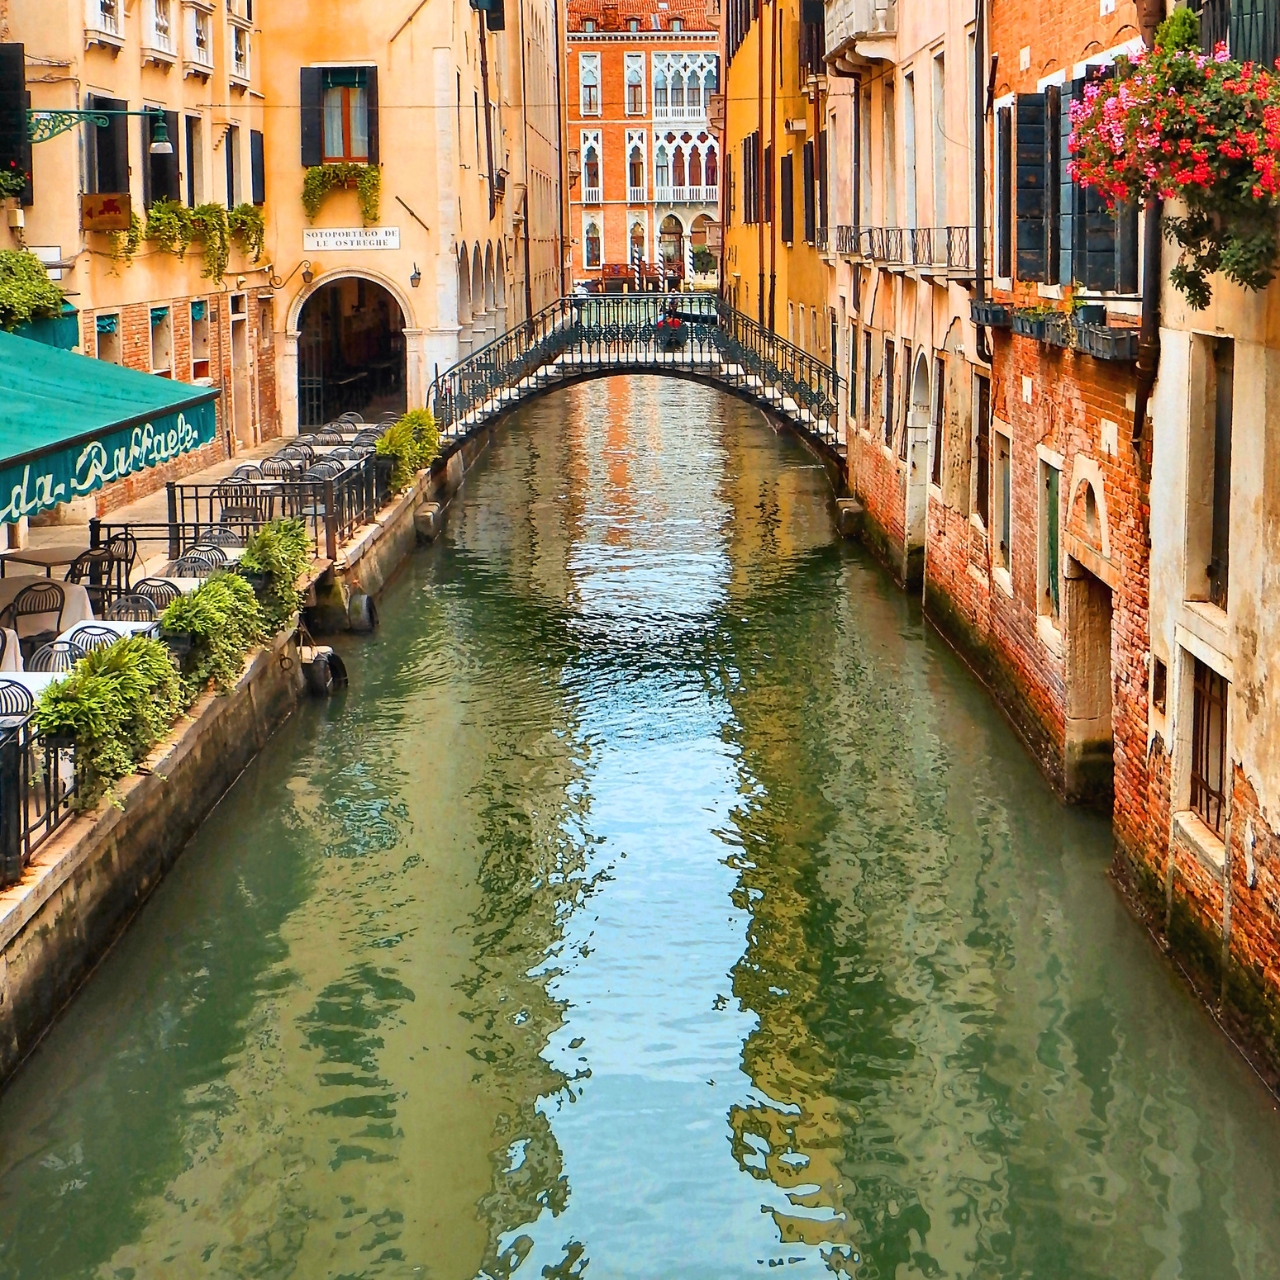 Canal in Venice with typical curved bridge over canal